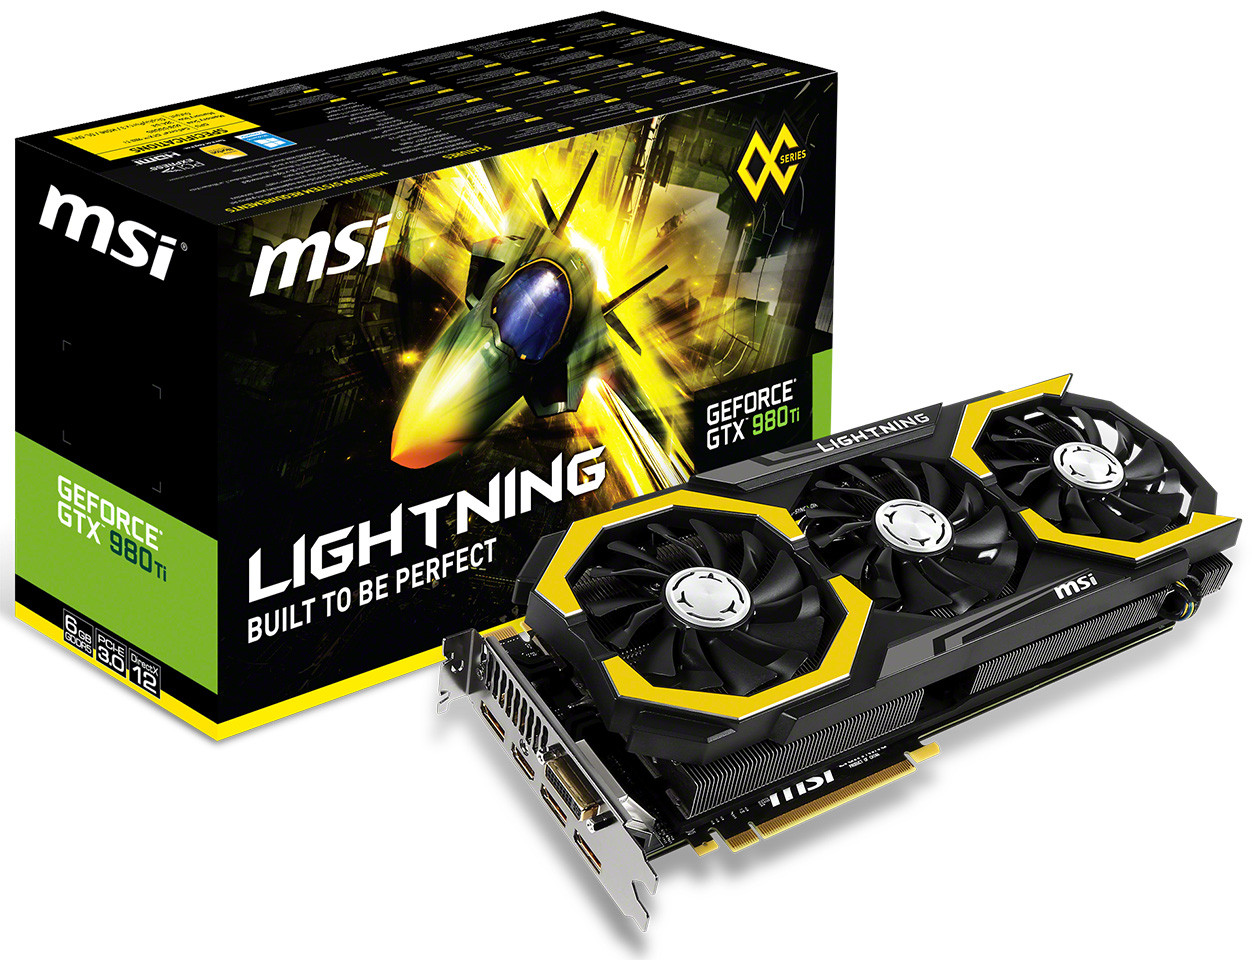 Media asset in full size related to 3dfxzone.it news item entitled as follows: Overclocking: MSI annuncia la video card GeForce GTX 980Ti Lightning | Image Name: news23014_MSI-GeForce-GTX-980Ti-Lightning_7.jpg